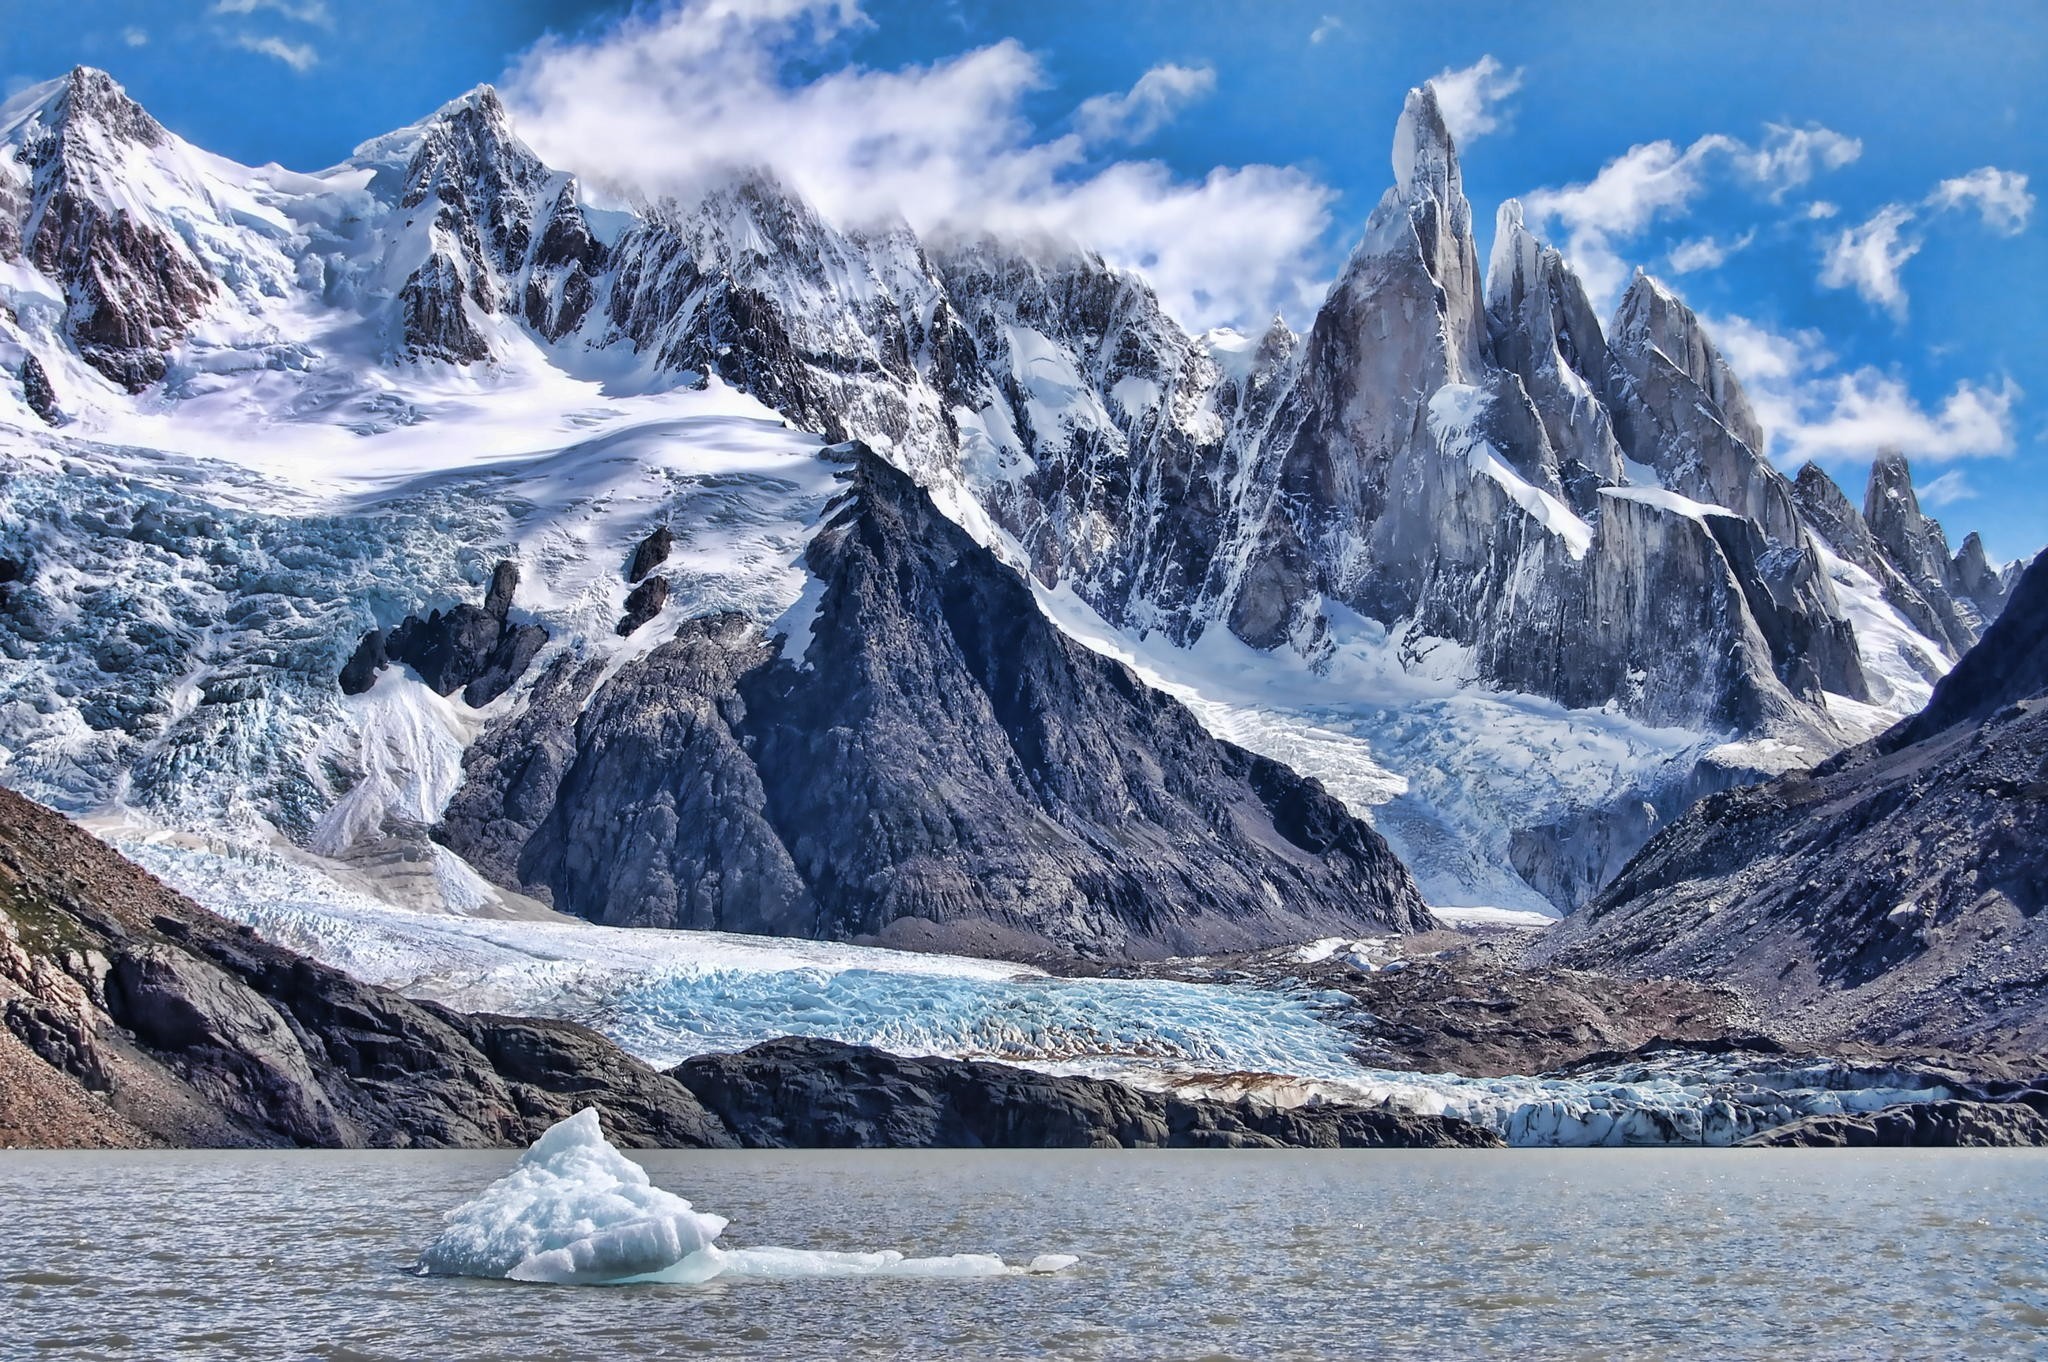 General 2048x1362 glacier Cerro Torre snow mountains ice Patagonia South America cold outdoors snowy peak snowy mountain nature landscape